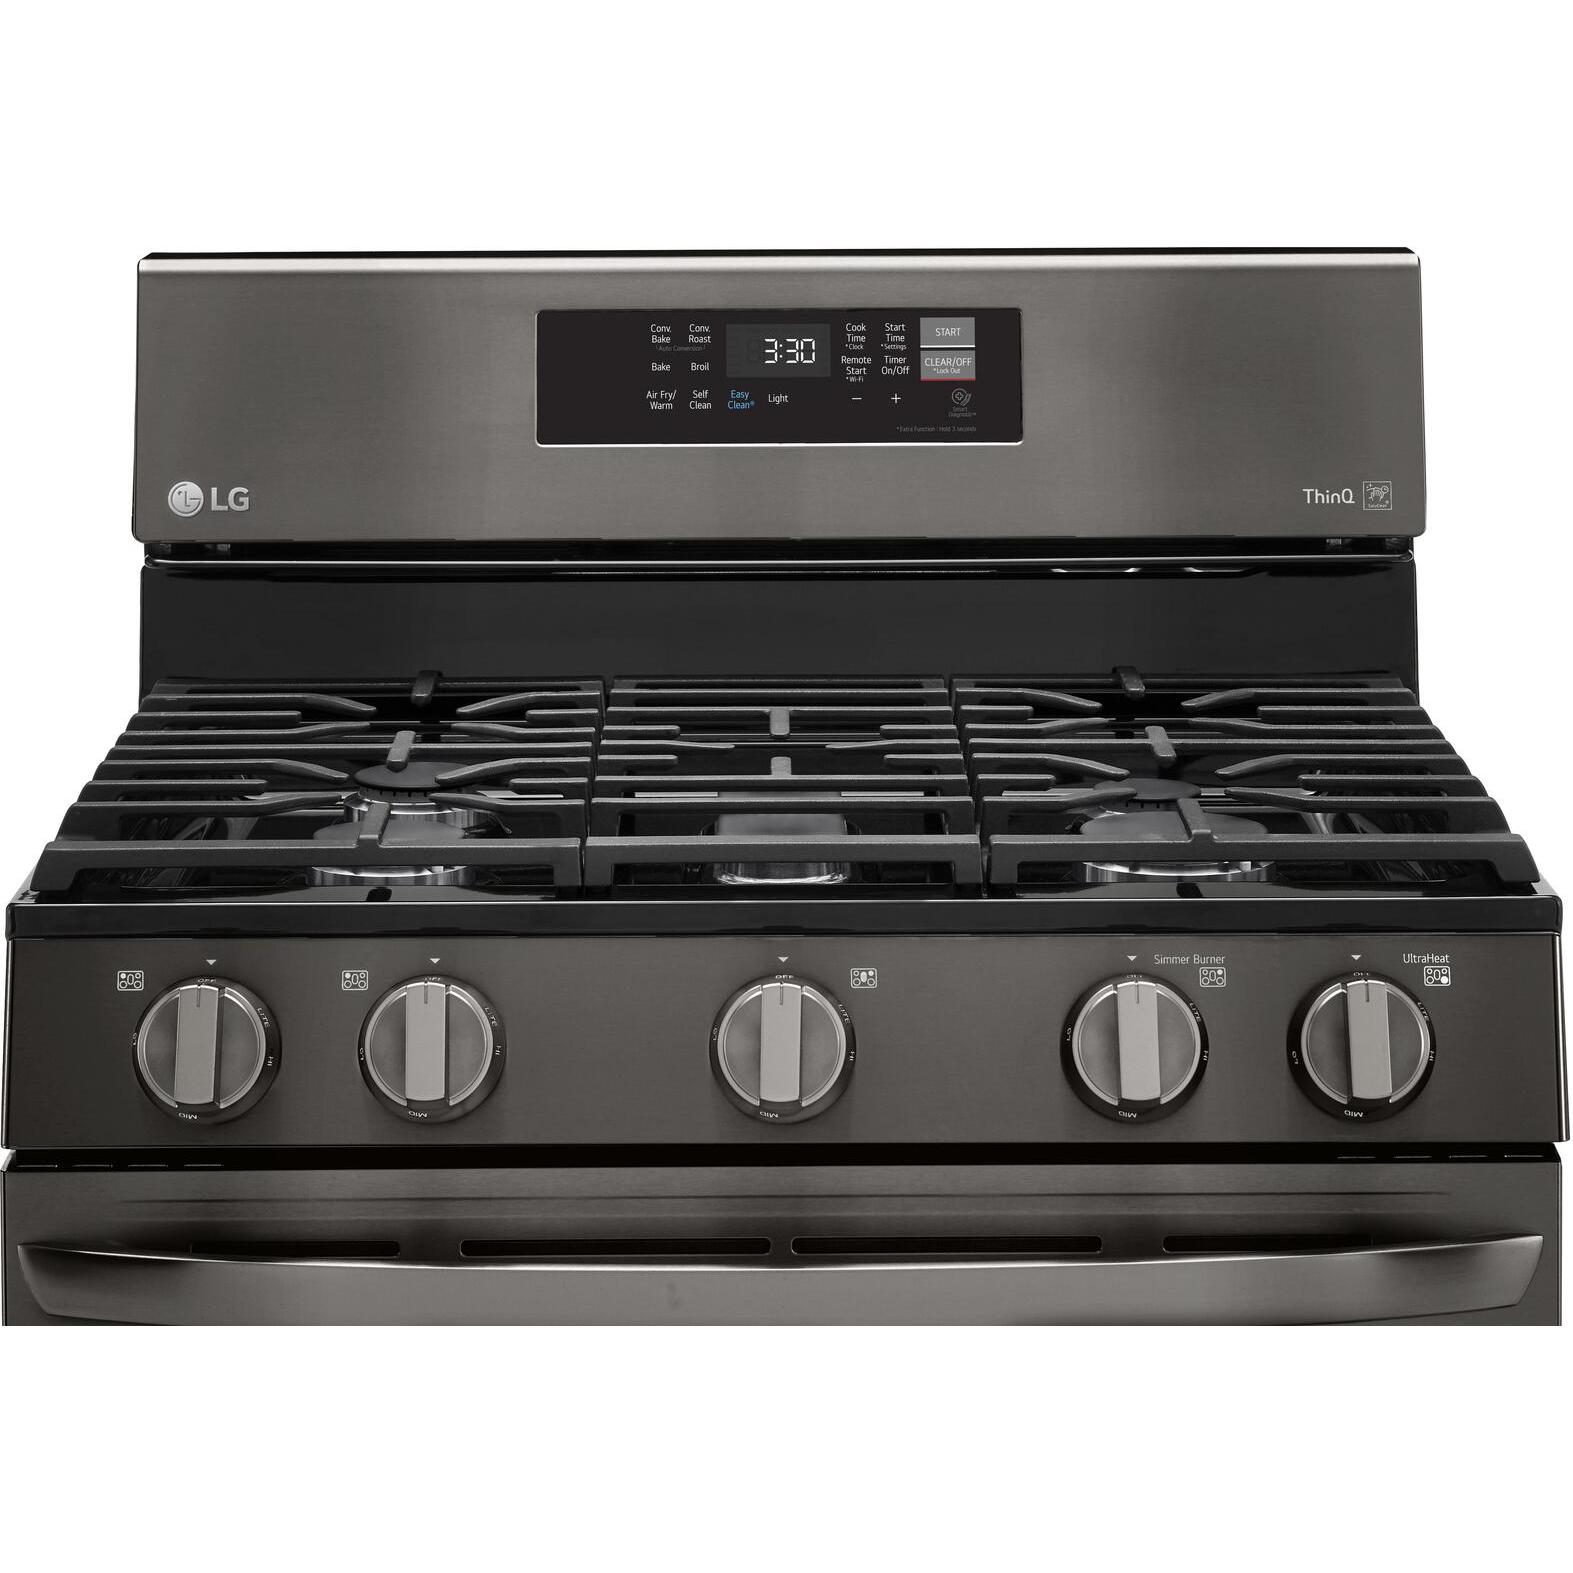 LG 30-inch Freestanding Gas Range with Convection Technology LRGL5823D